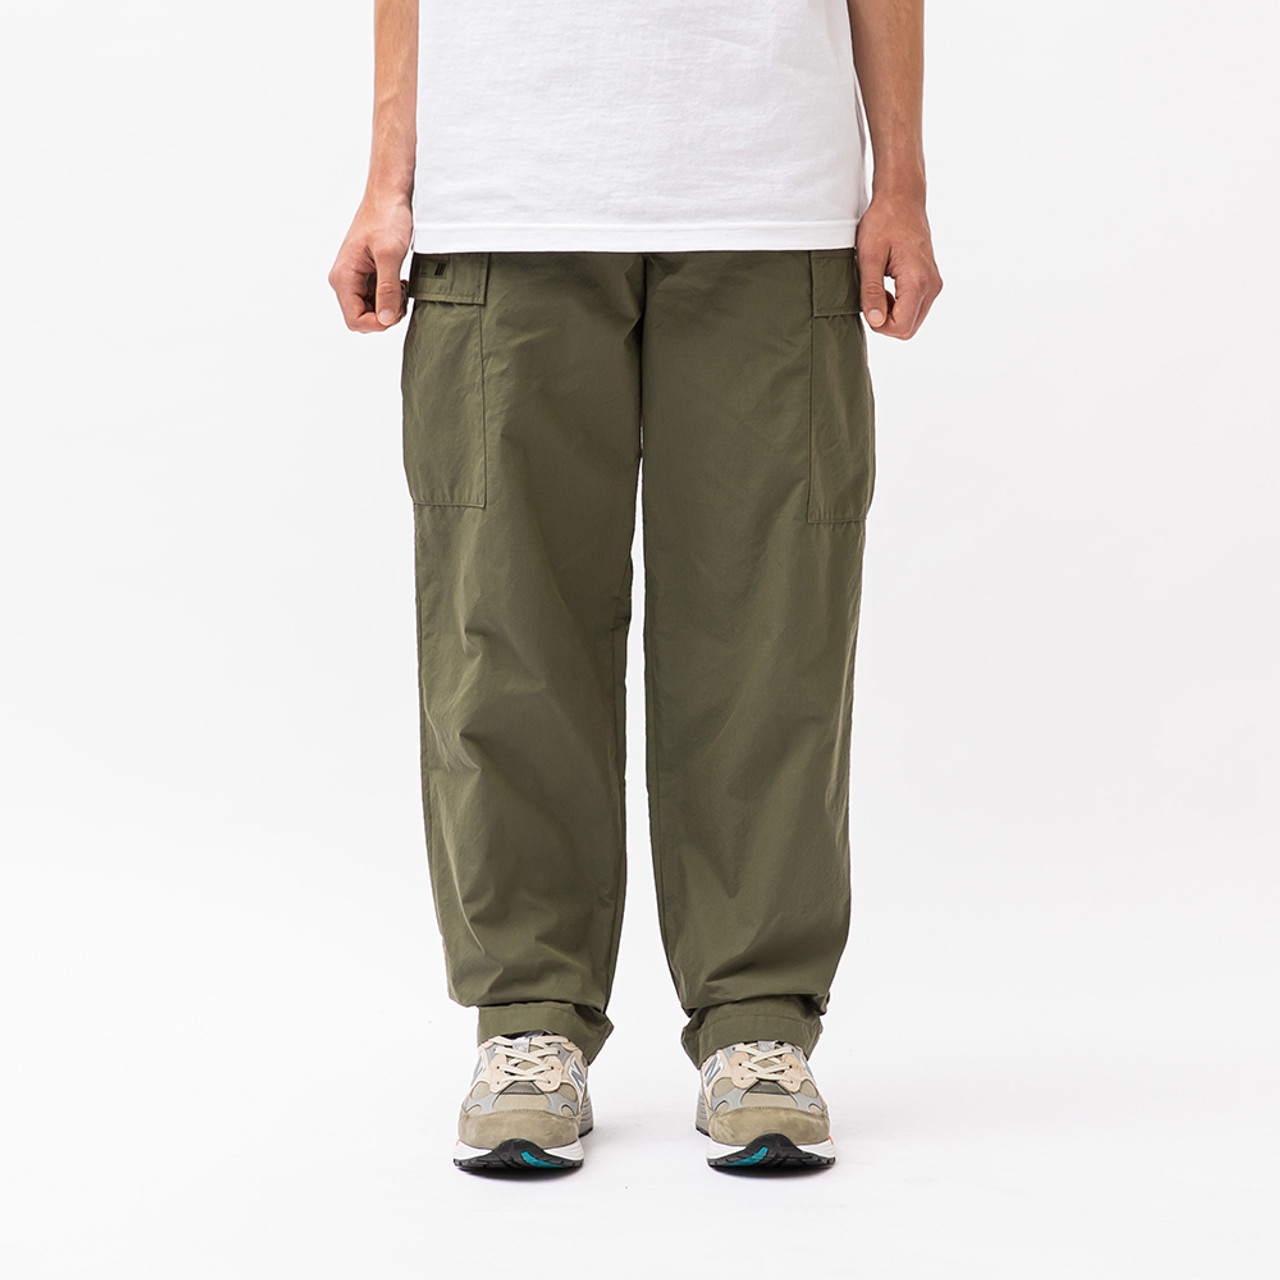 BGT / TROUSERS / NYCO. RIPSTOP. CORDURA® 222WVDT-PTM06